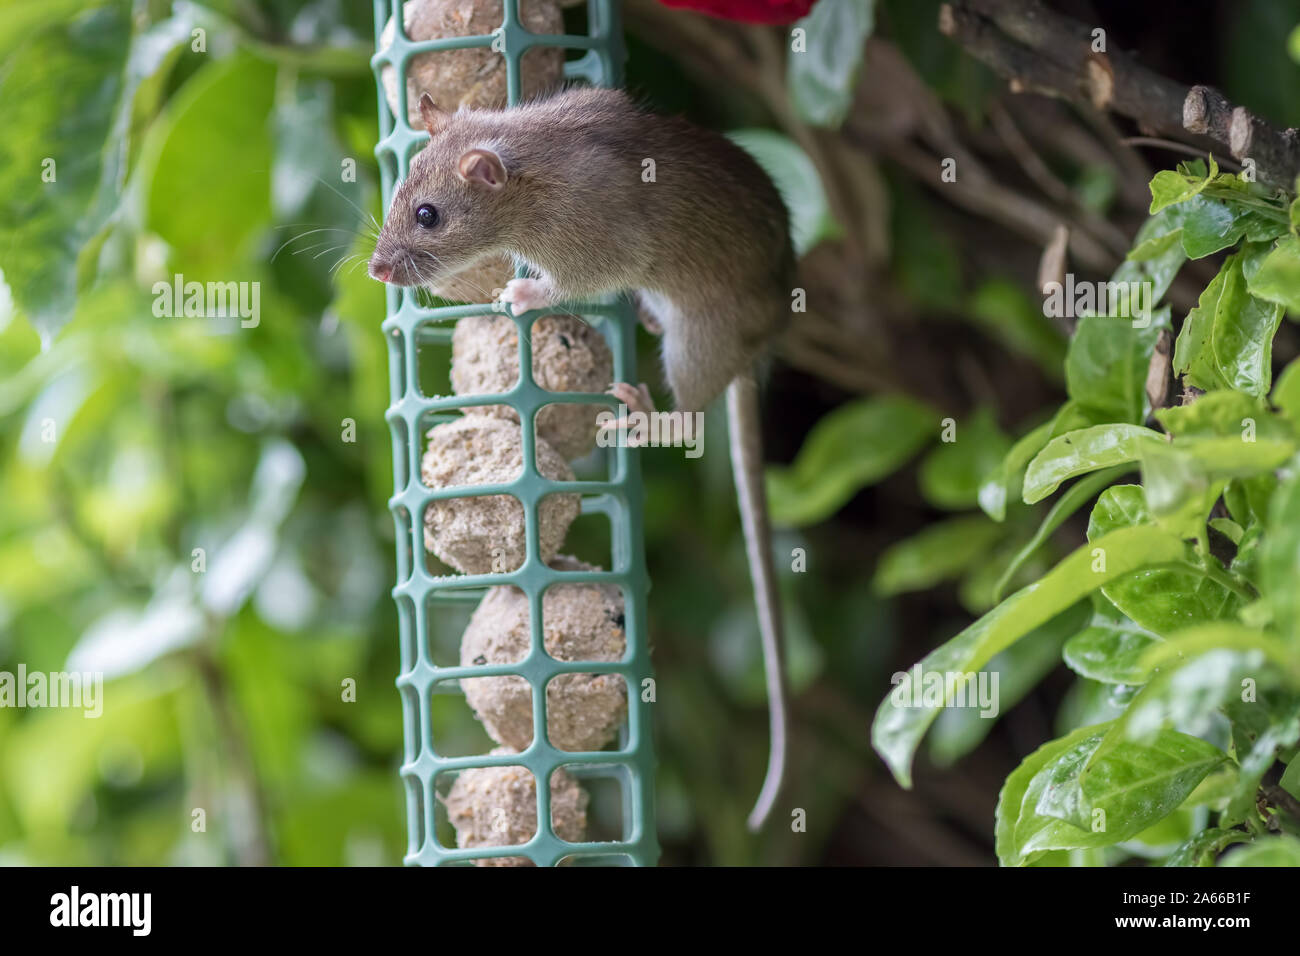 Young rat or mouse stealing food from garden bird feeder. Cute wildlife or vermin pest. Fat balls attracting uninvited rodent guest. Nature image of a Stock Photo